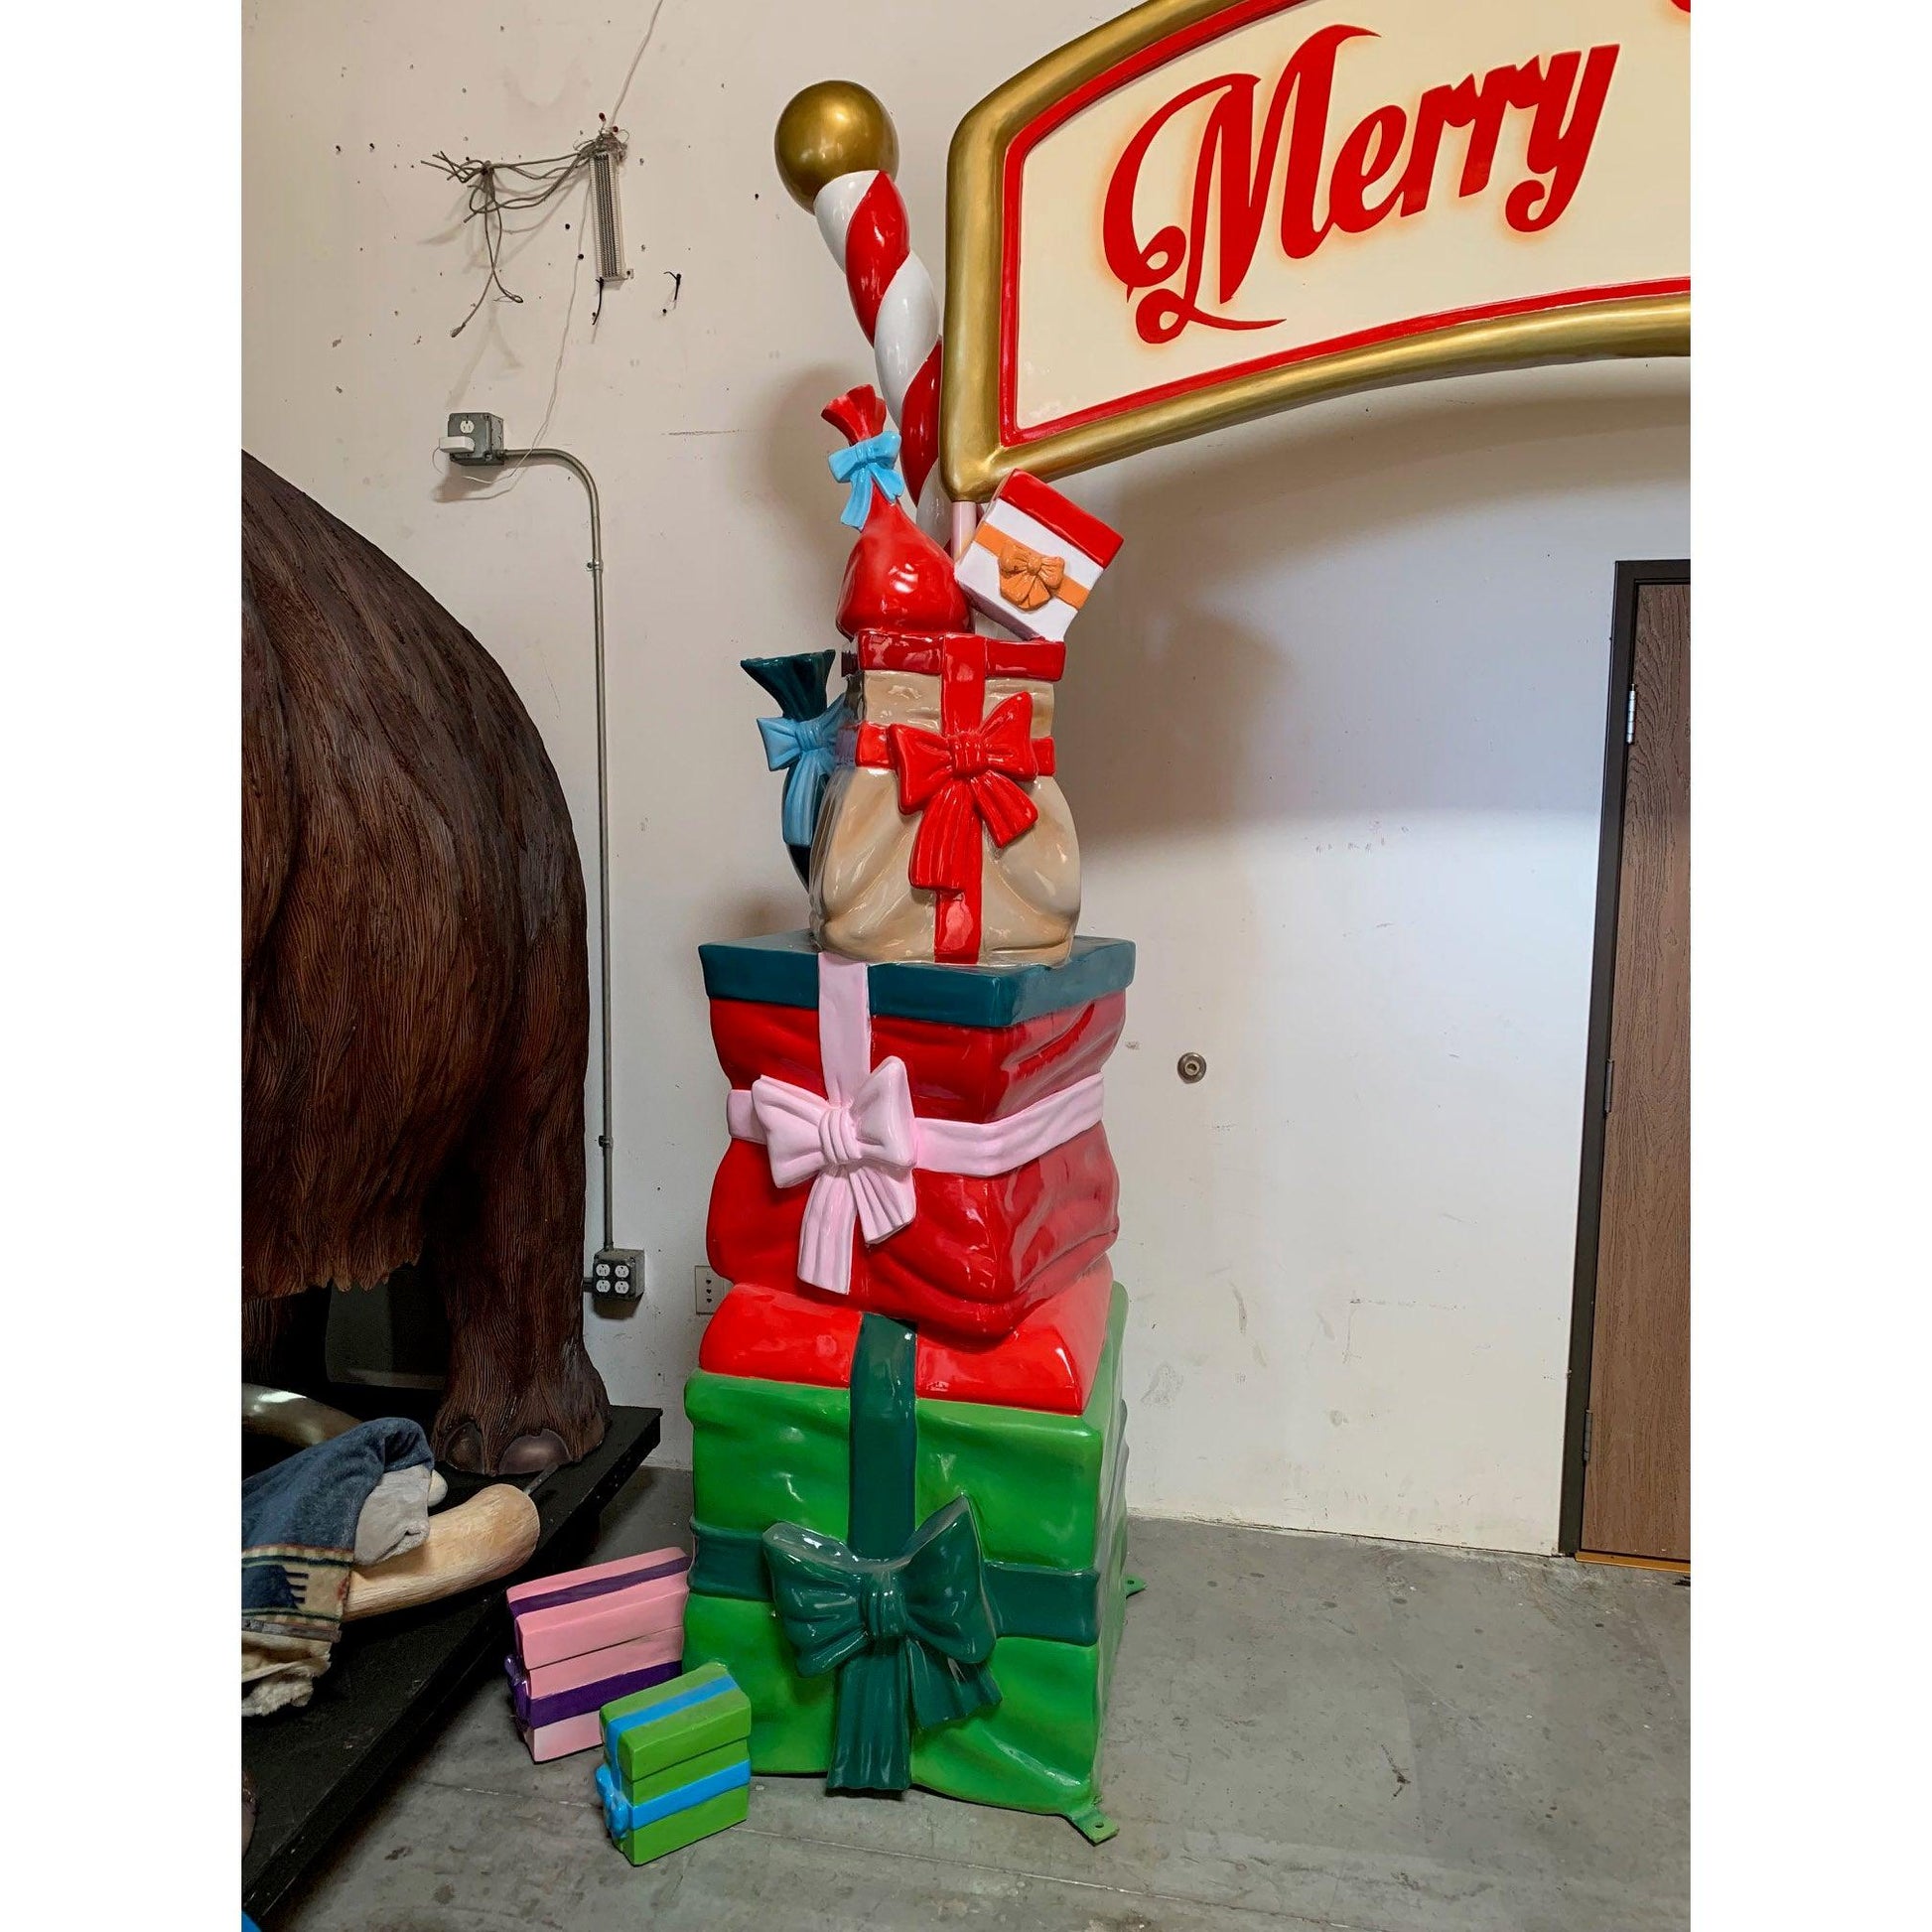 Merry Christmas Gifts Archway Statue - LM Treasures Prop Rentals 